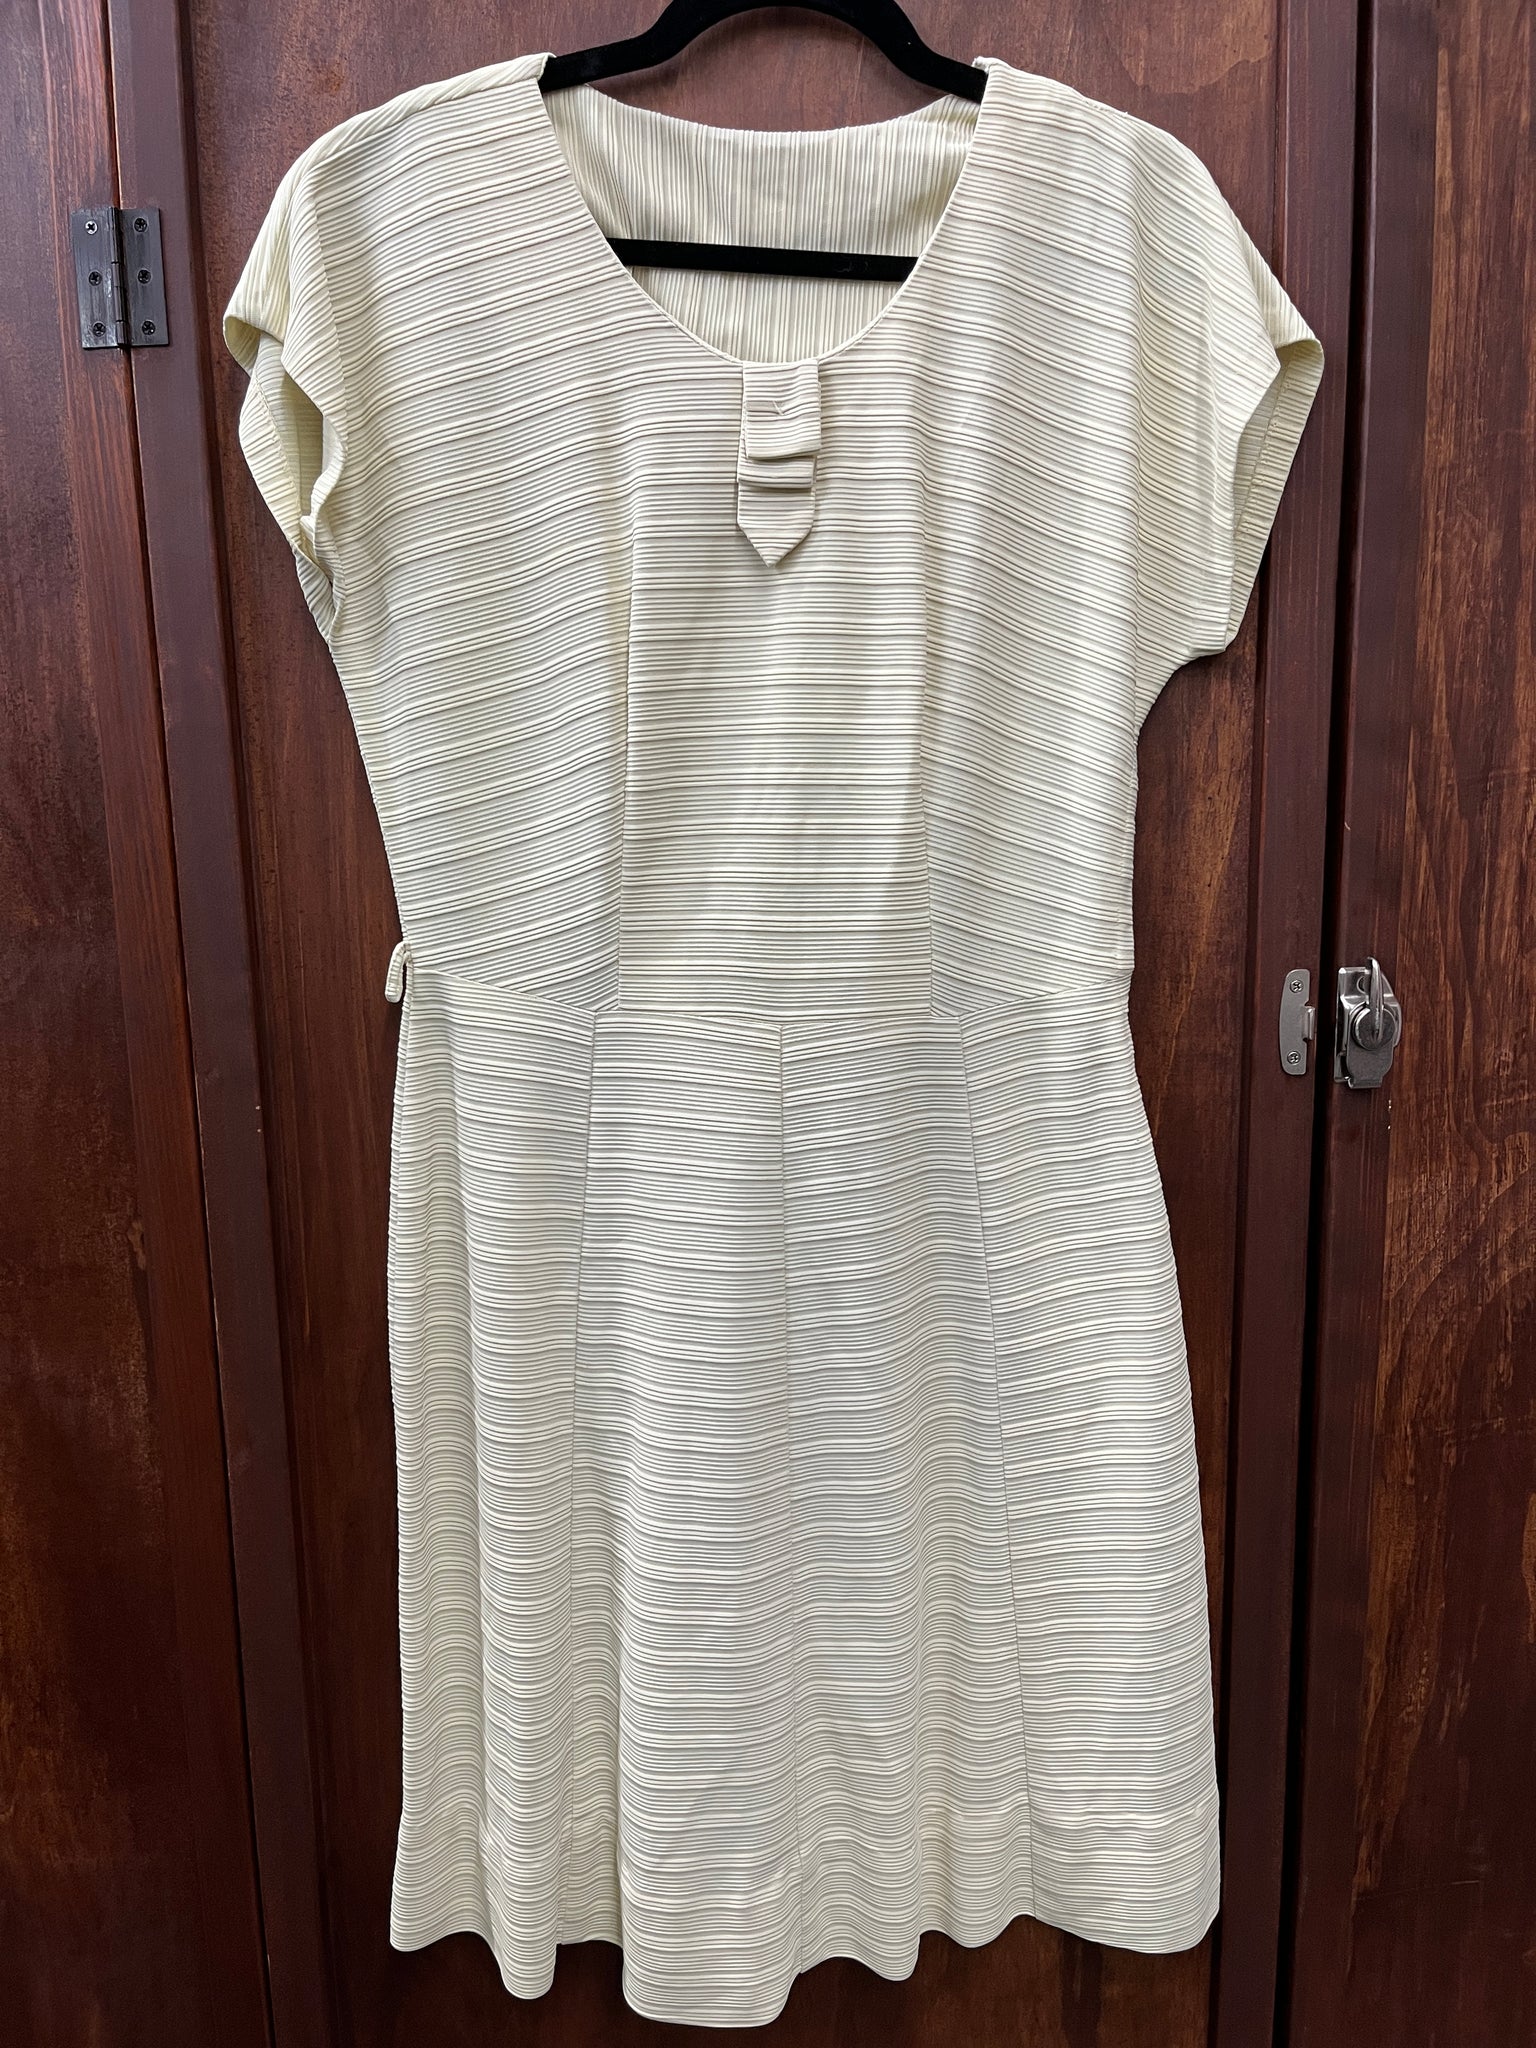 1960s DRESS- Cream corded fabric with neck detail